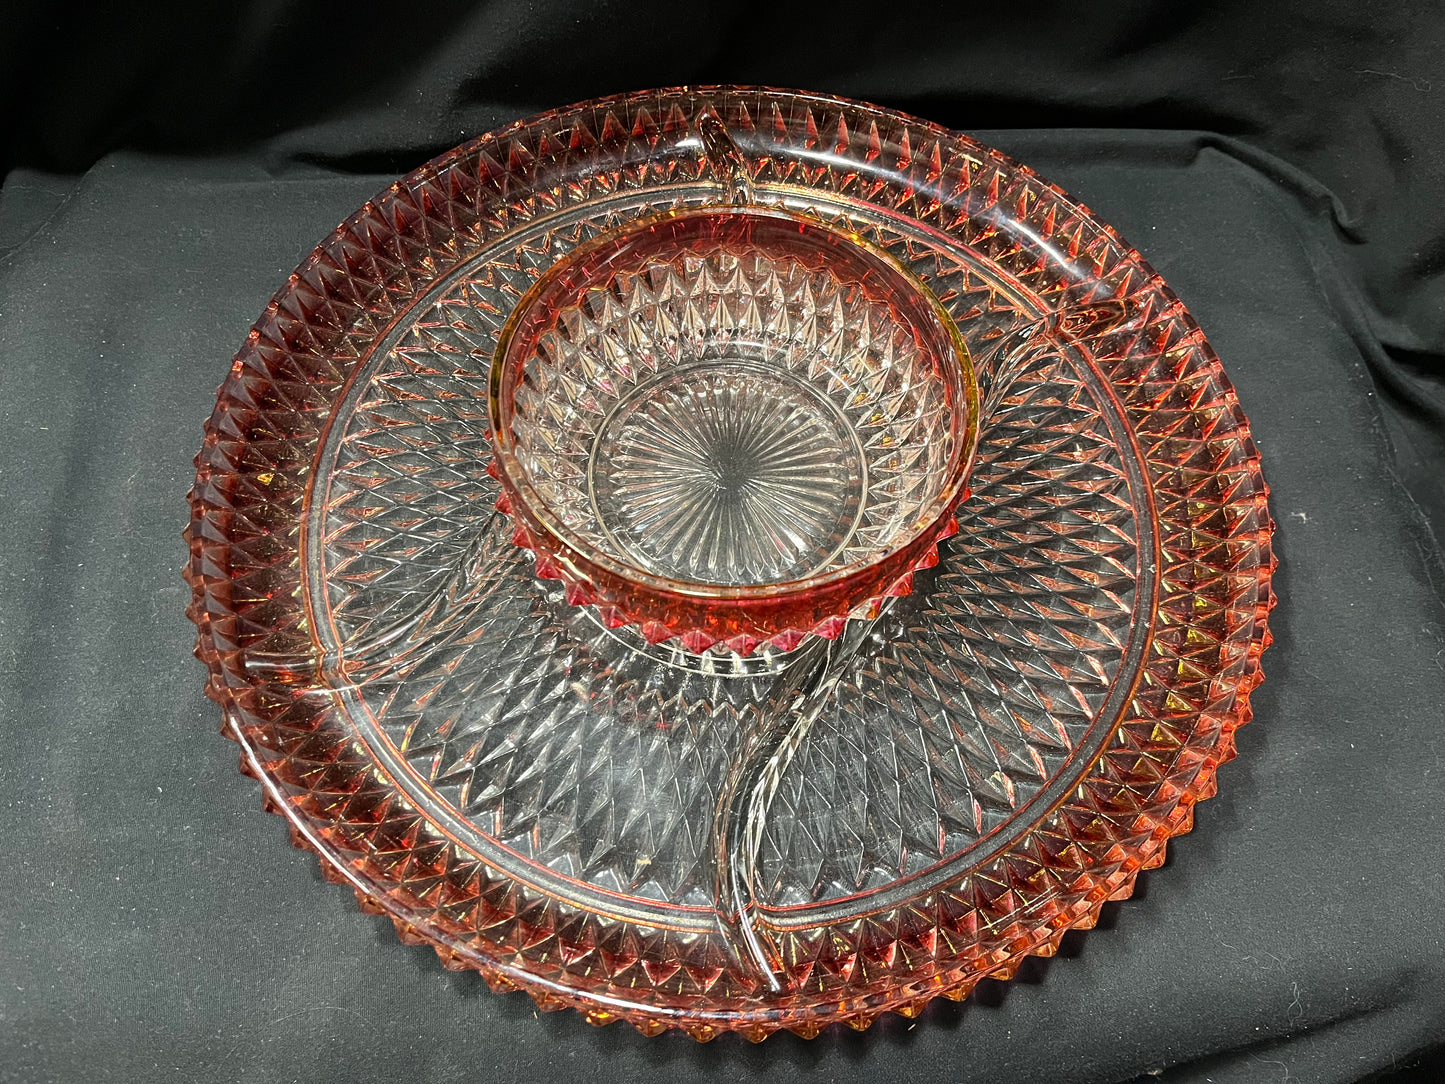 Diamond Pointe Cranberry Flash Serving Dishes - Relish Server and Bowl